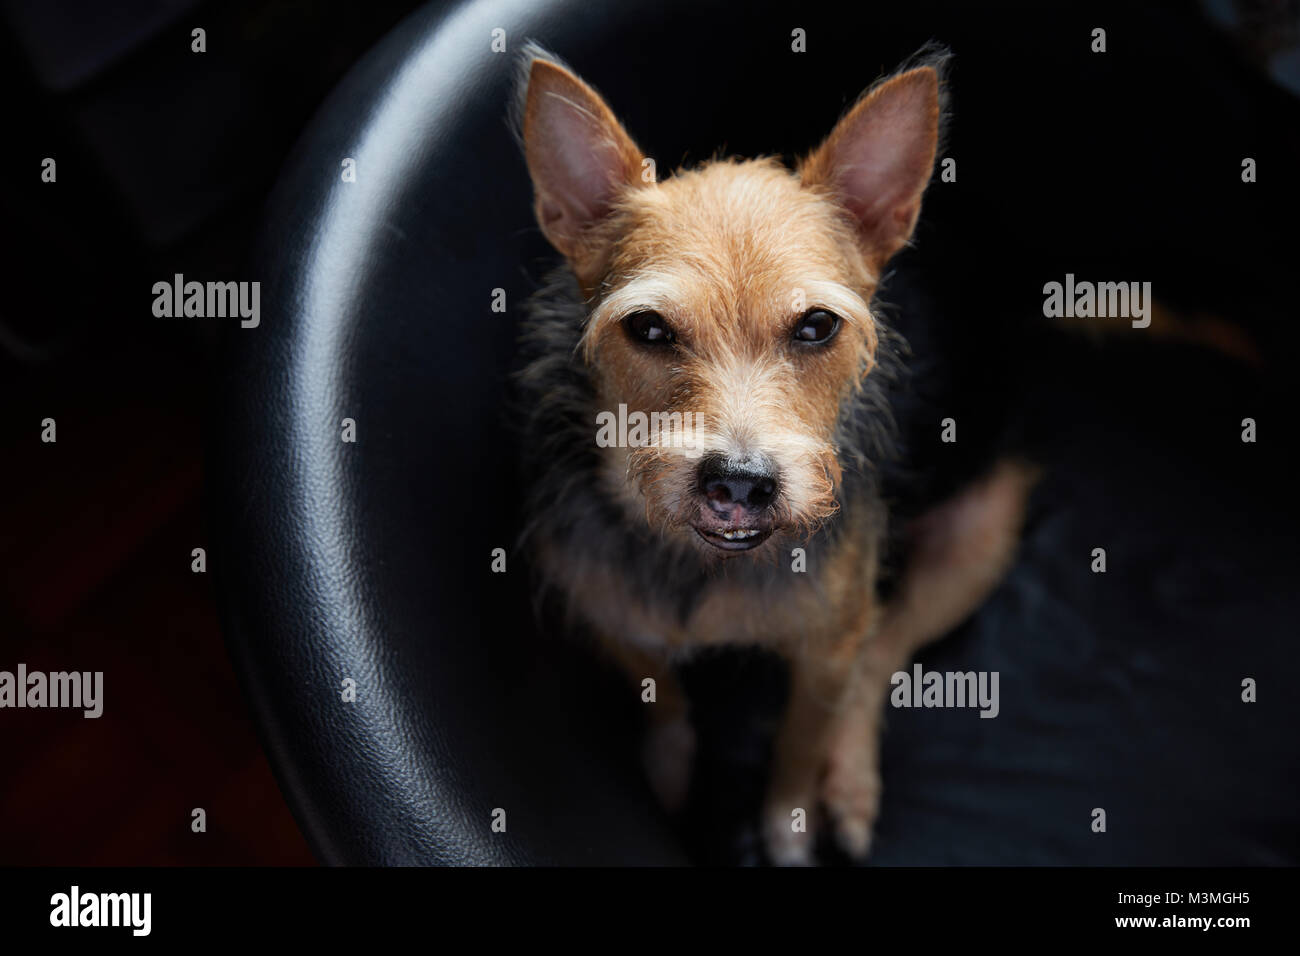 Grouchy pet mongrel terrier sitting on sofa chair looking at camera. Stock Photo